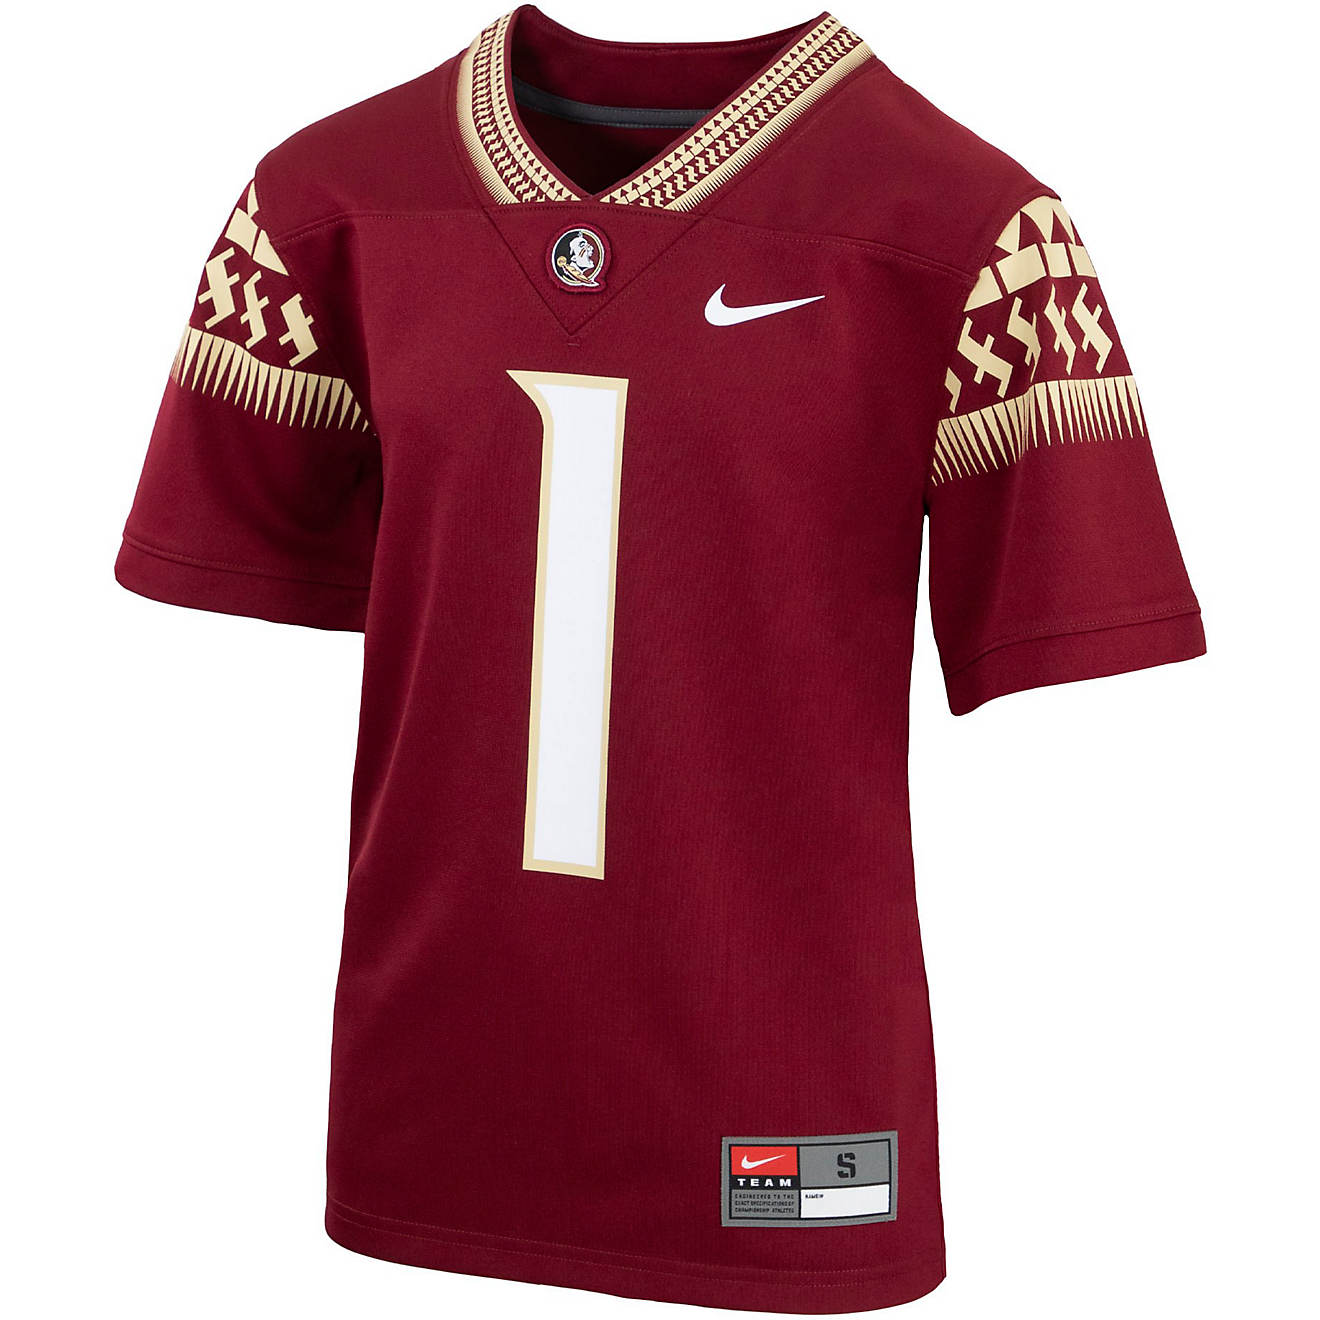 Nike Kids' Florida State University Untouchable Football Jersey                                                                  - view number 1